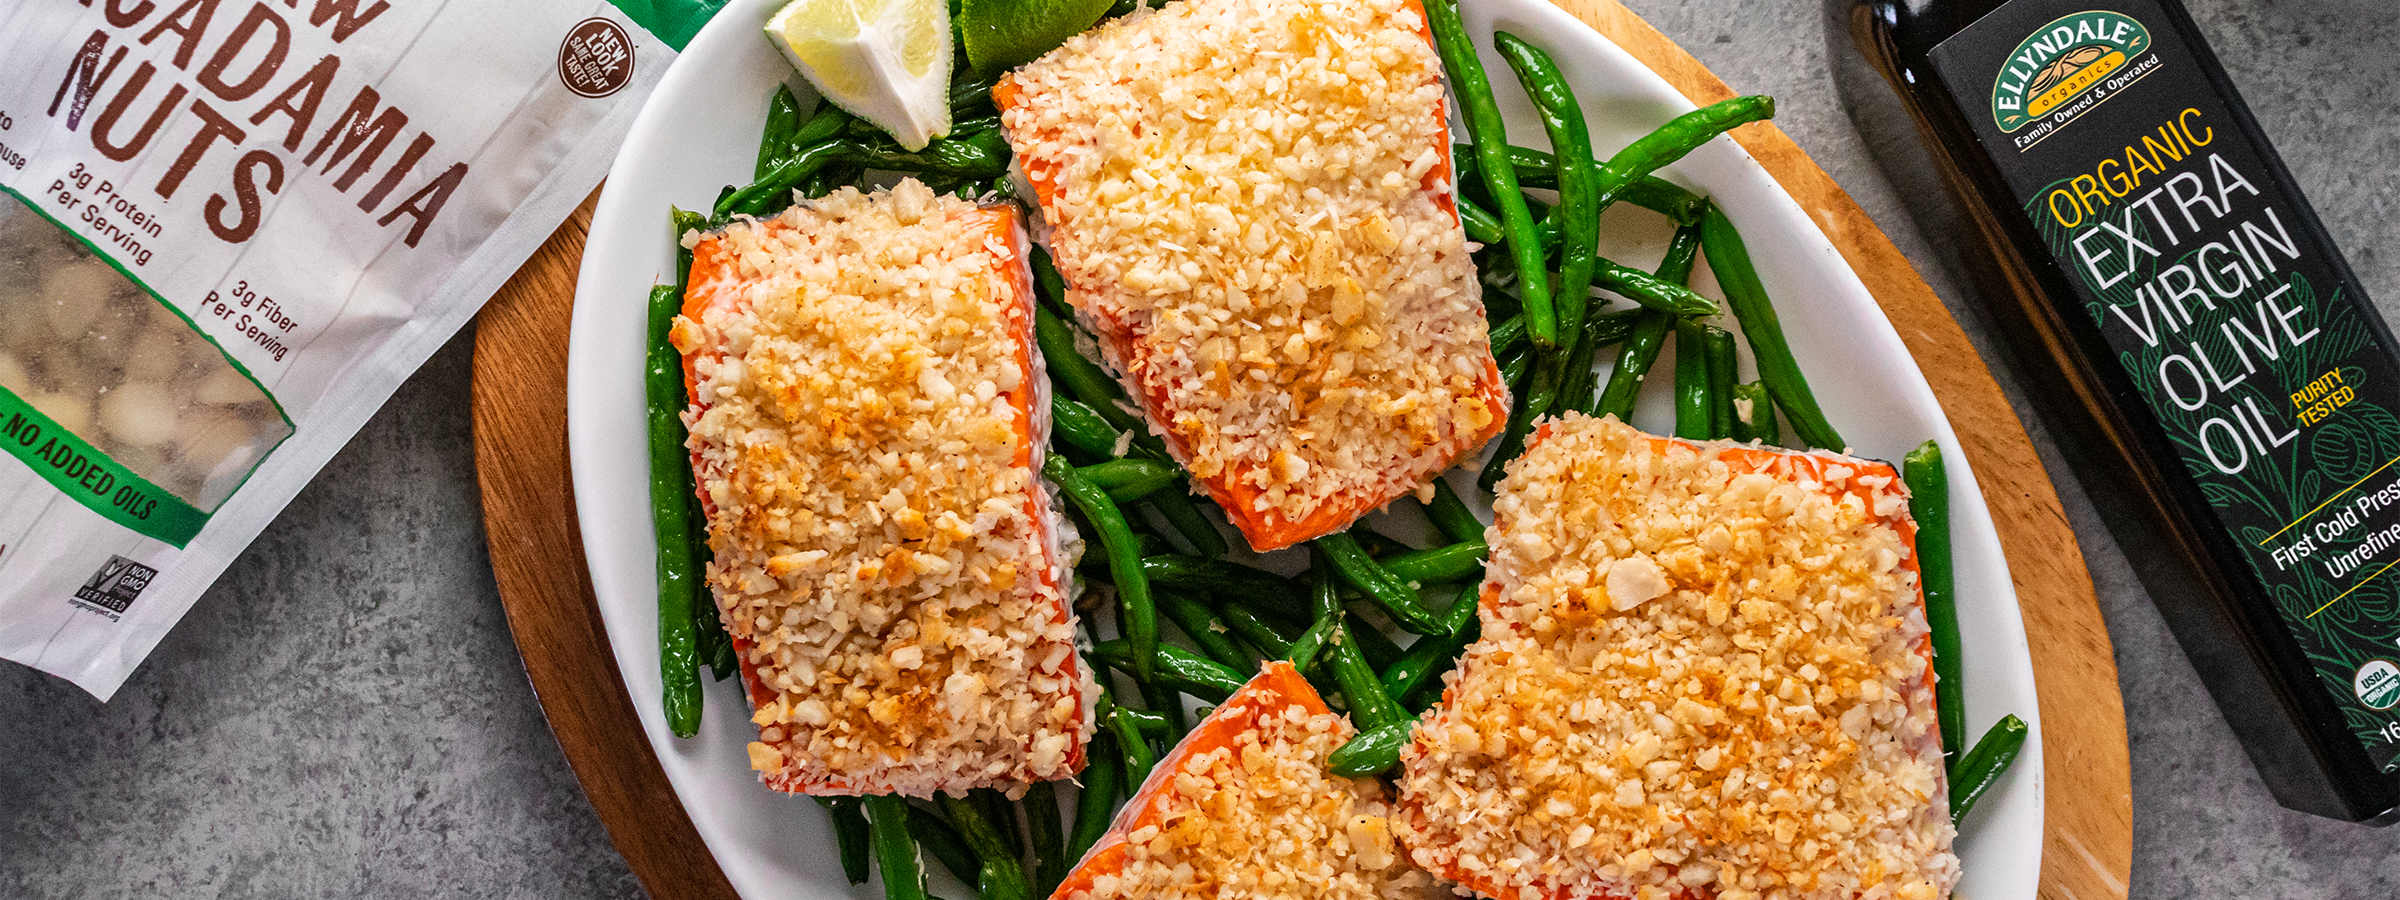 top view of Sheet Pan Macadamia Nut Crusted Salmon and Green Beans between macadamia nuts and extra virgin olive oil